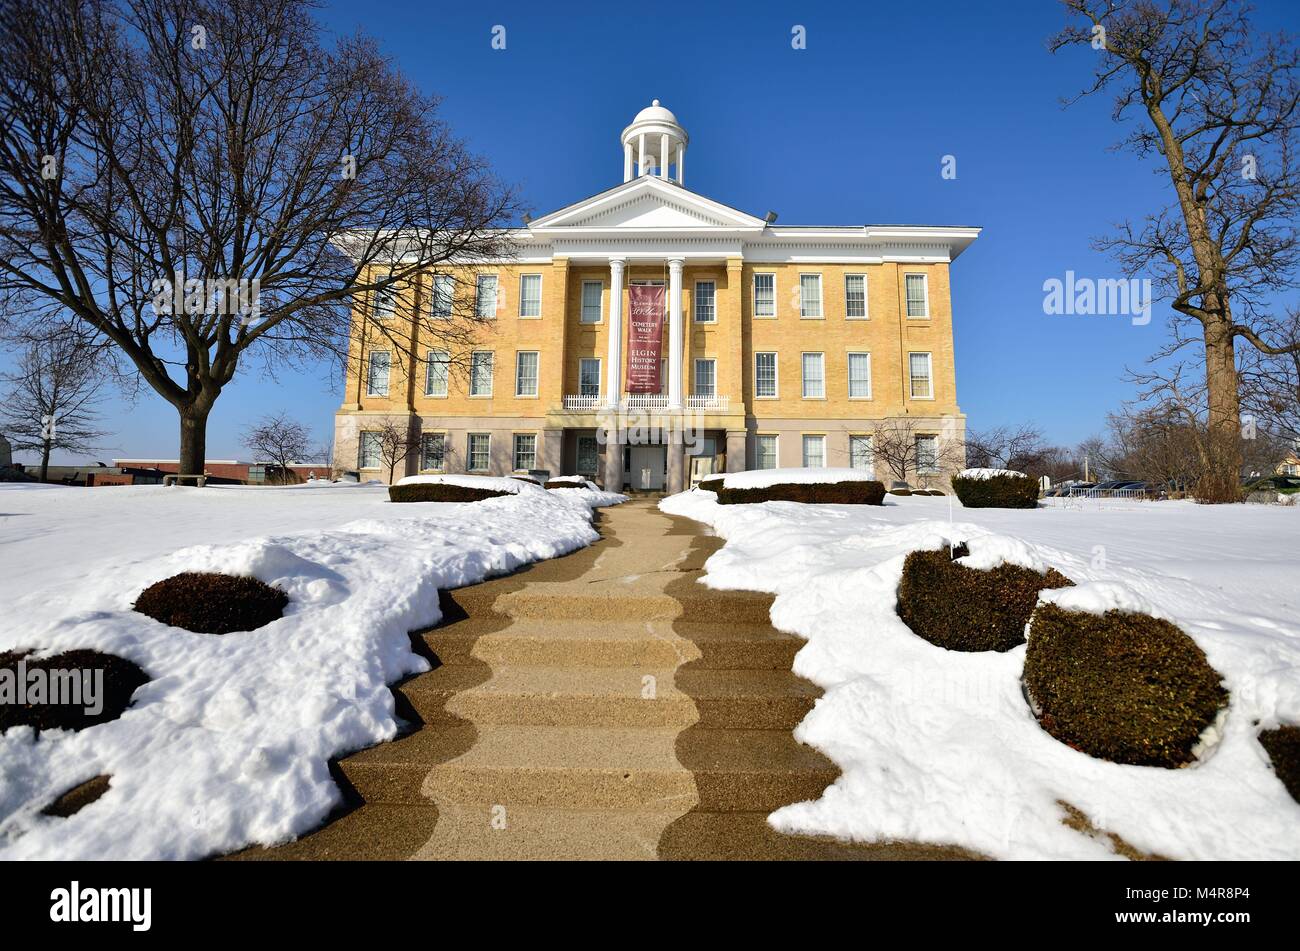 The Old Main, completed in 1856 is the original Elgin Academy building. The structure was built in the Greek revival style. Elgin, Illinois, USA. Stock Photo